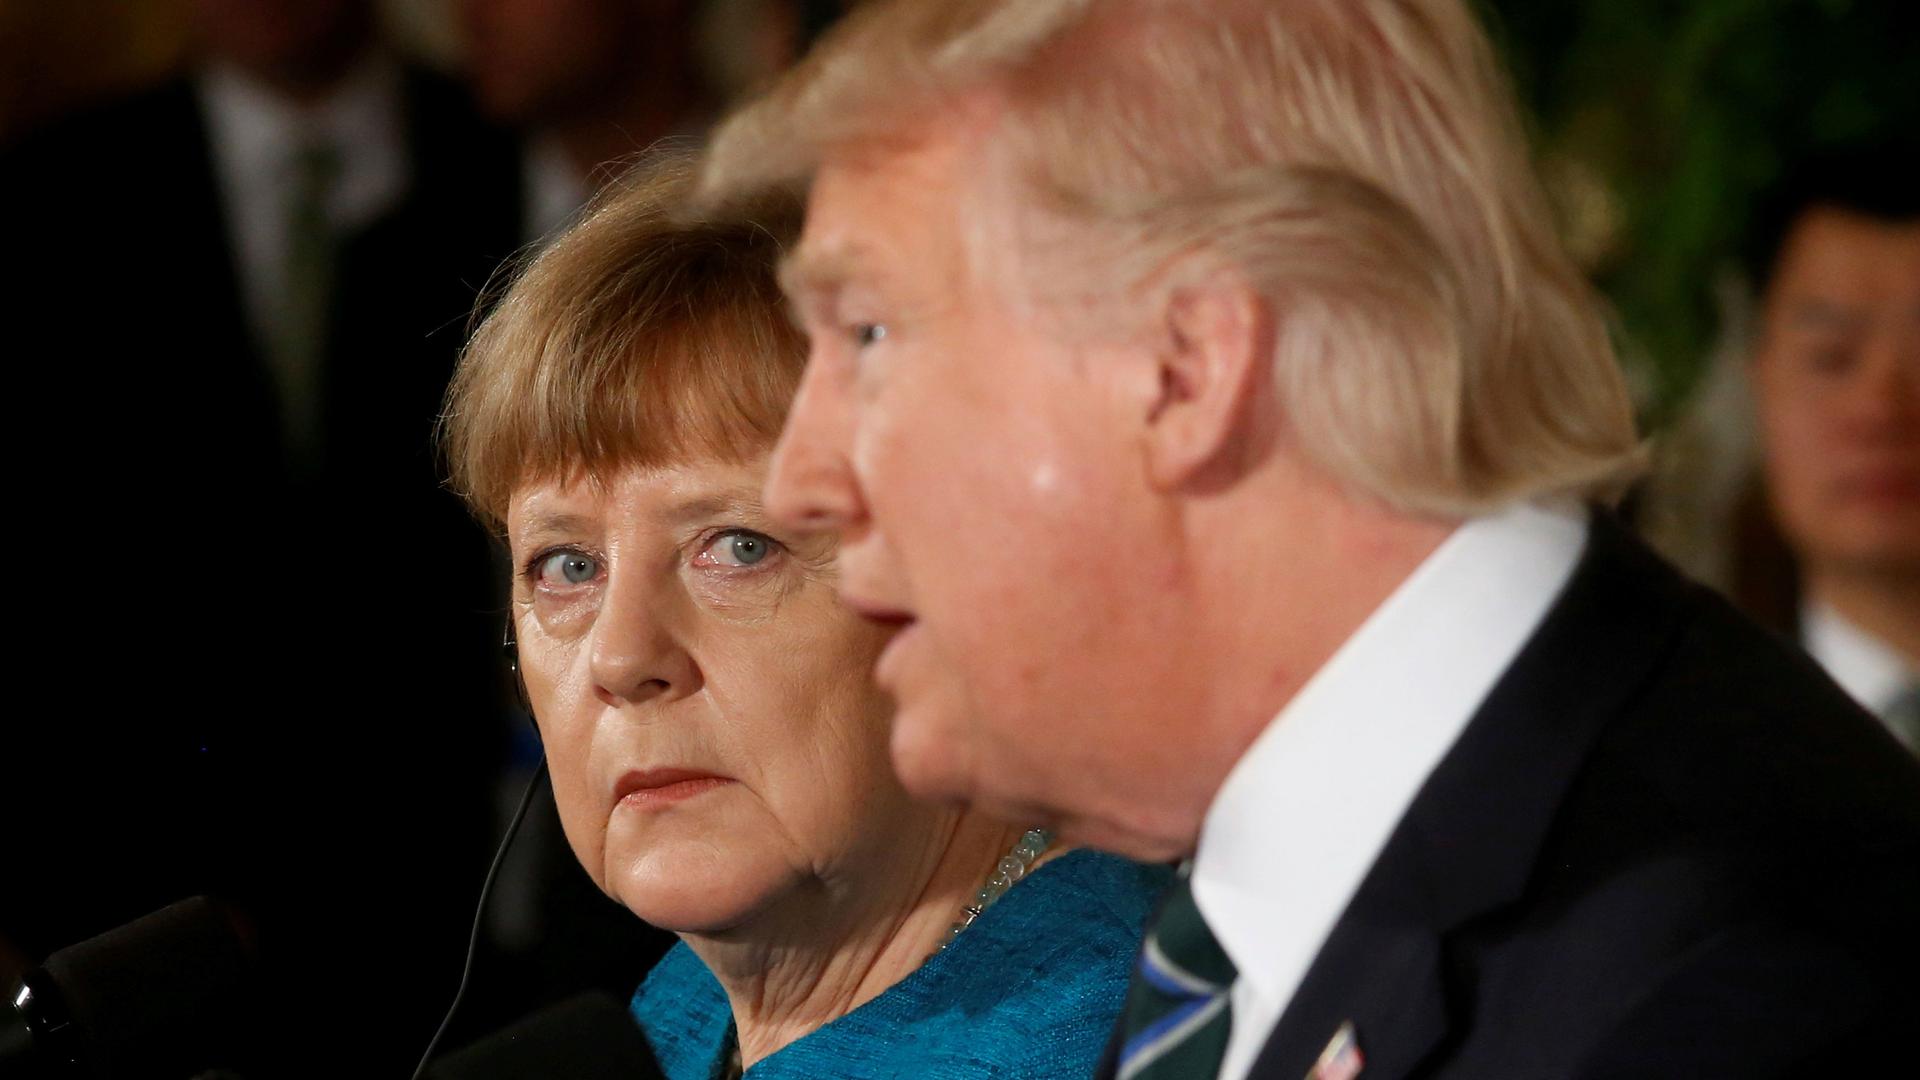 Germany's Chancellor Angela Merkel and President Donald Trump hold a joint news conference in the East Room of the White House in Washington, DC, March 17, 2017.